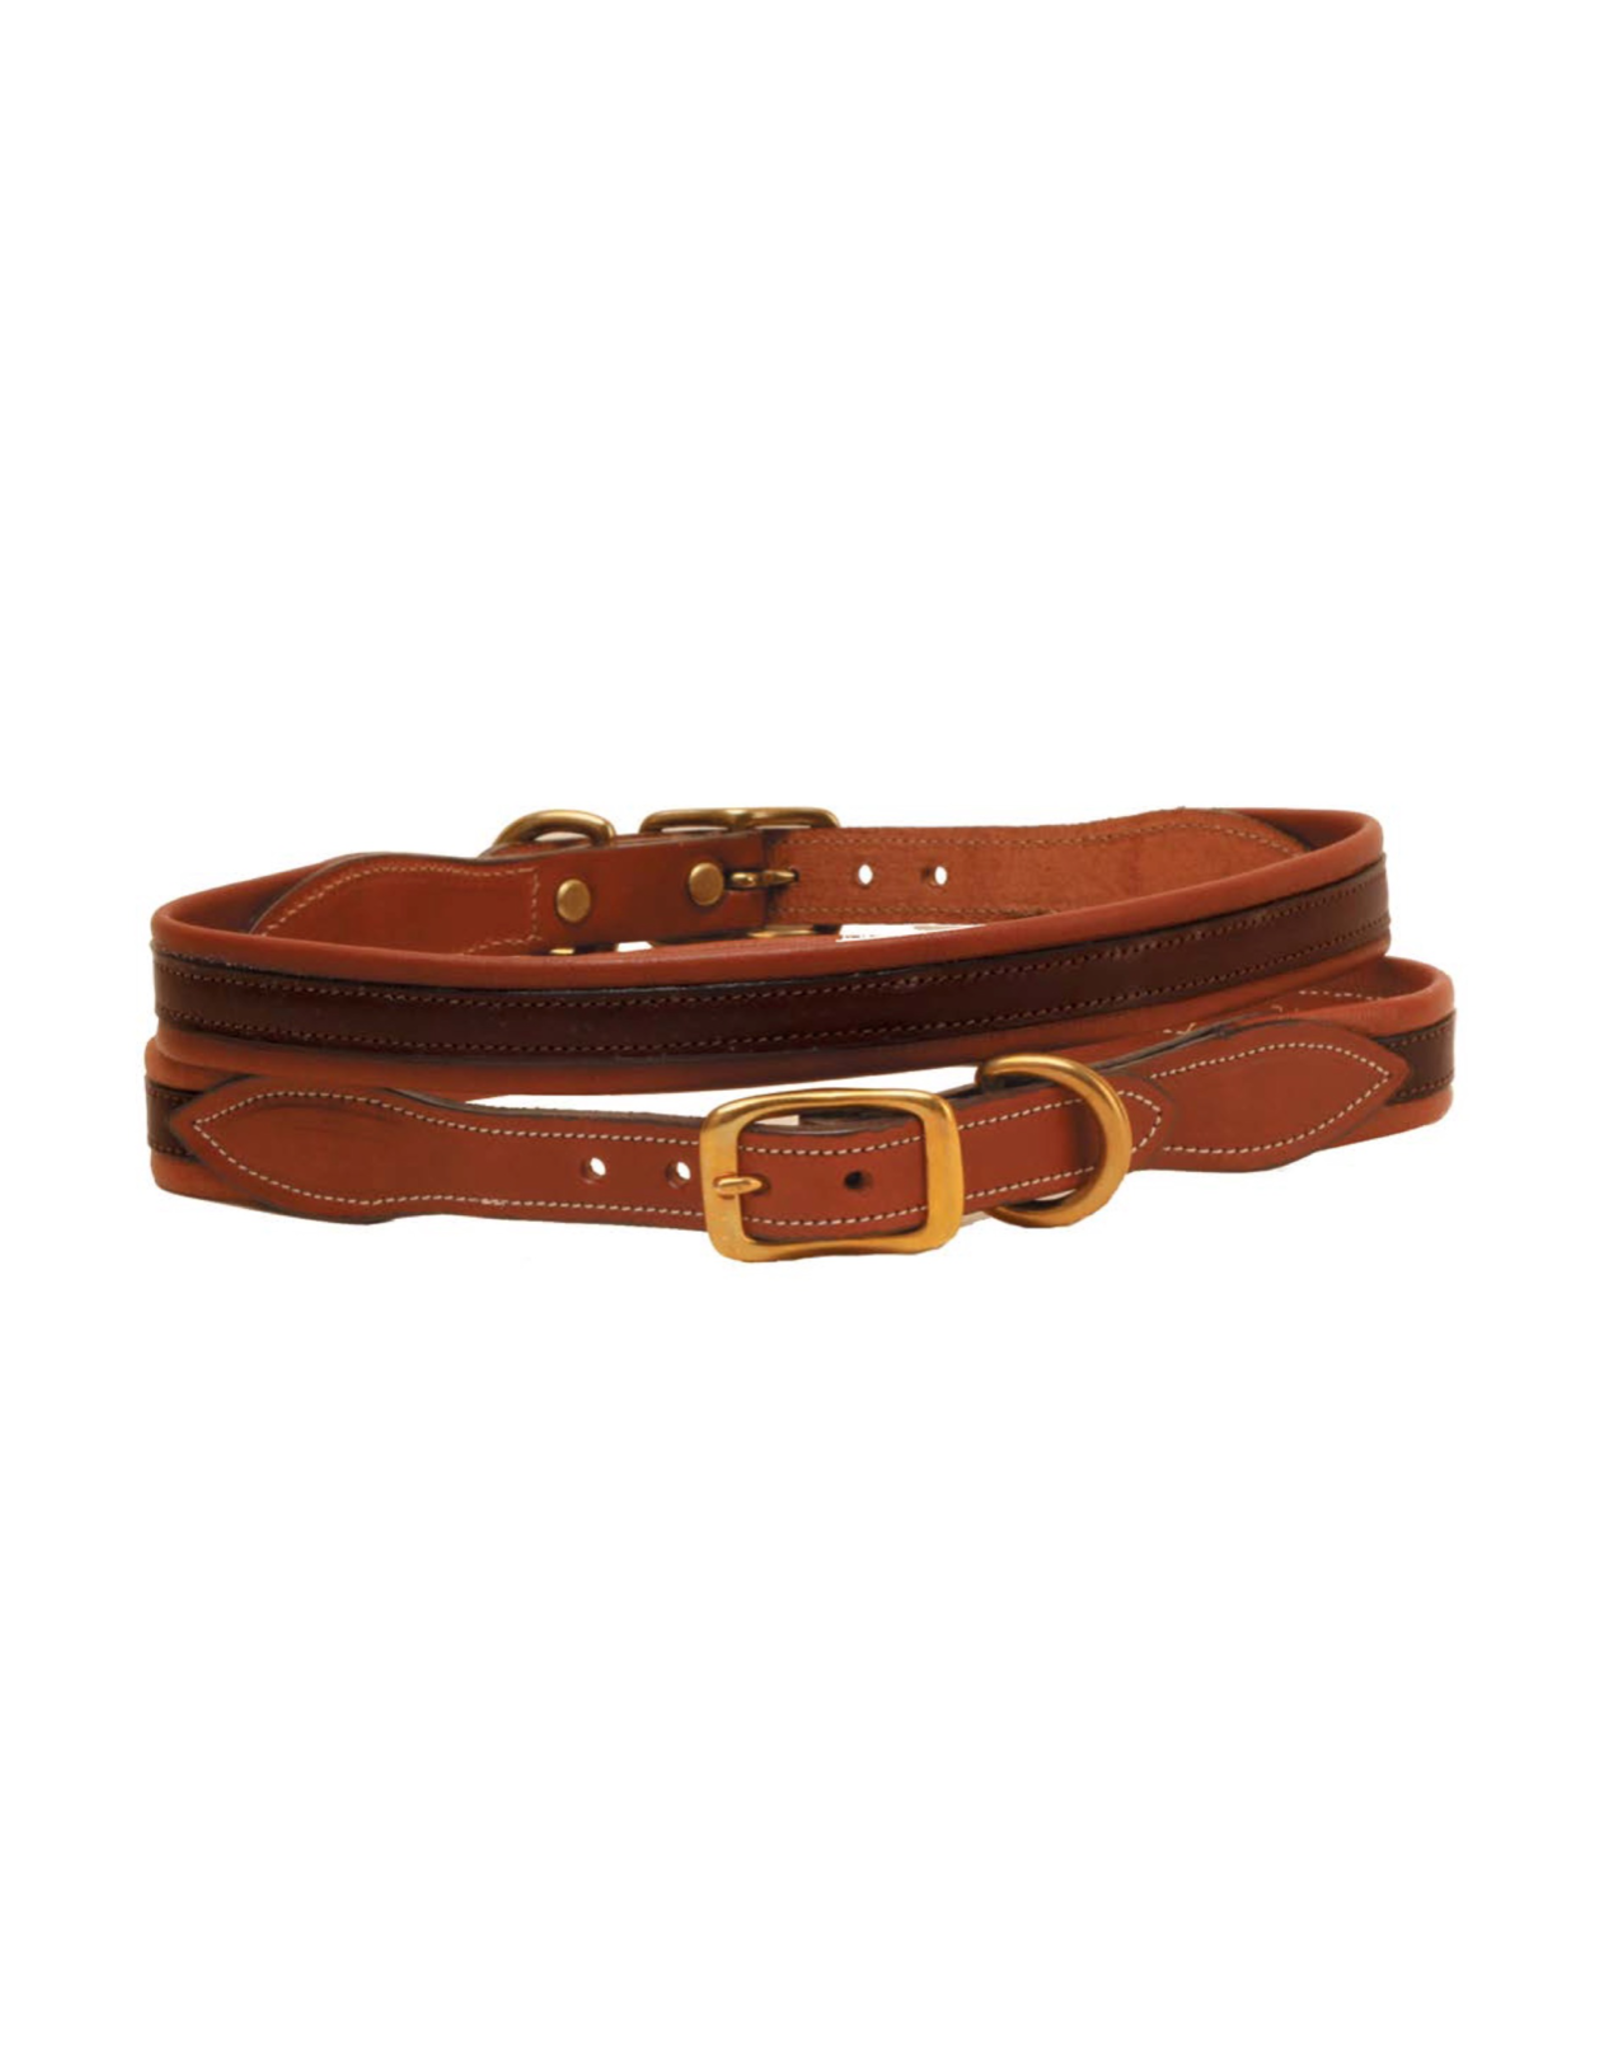 Tory Leather 1" Padded Overlay Collar